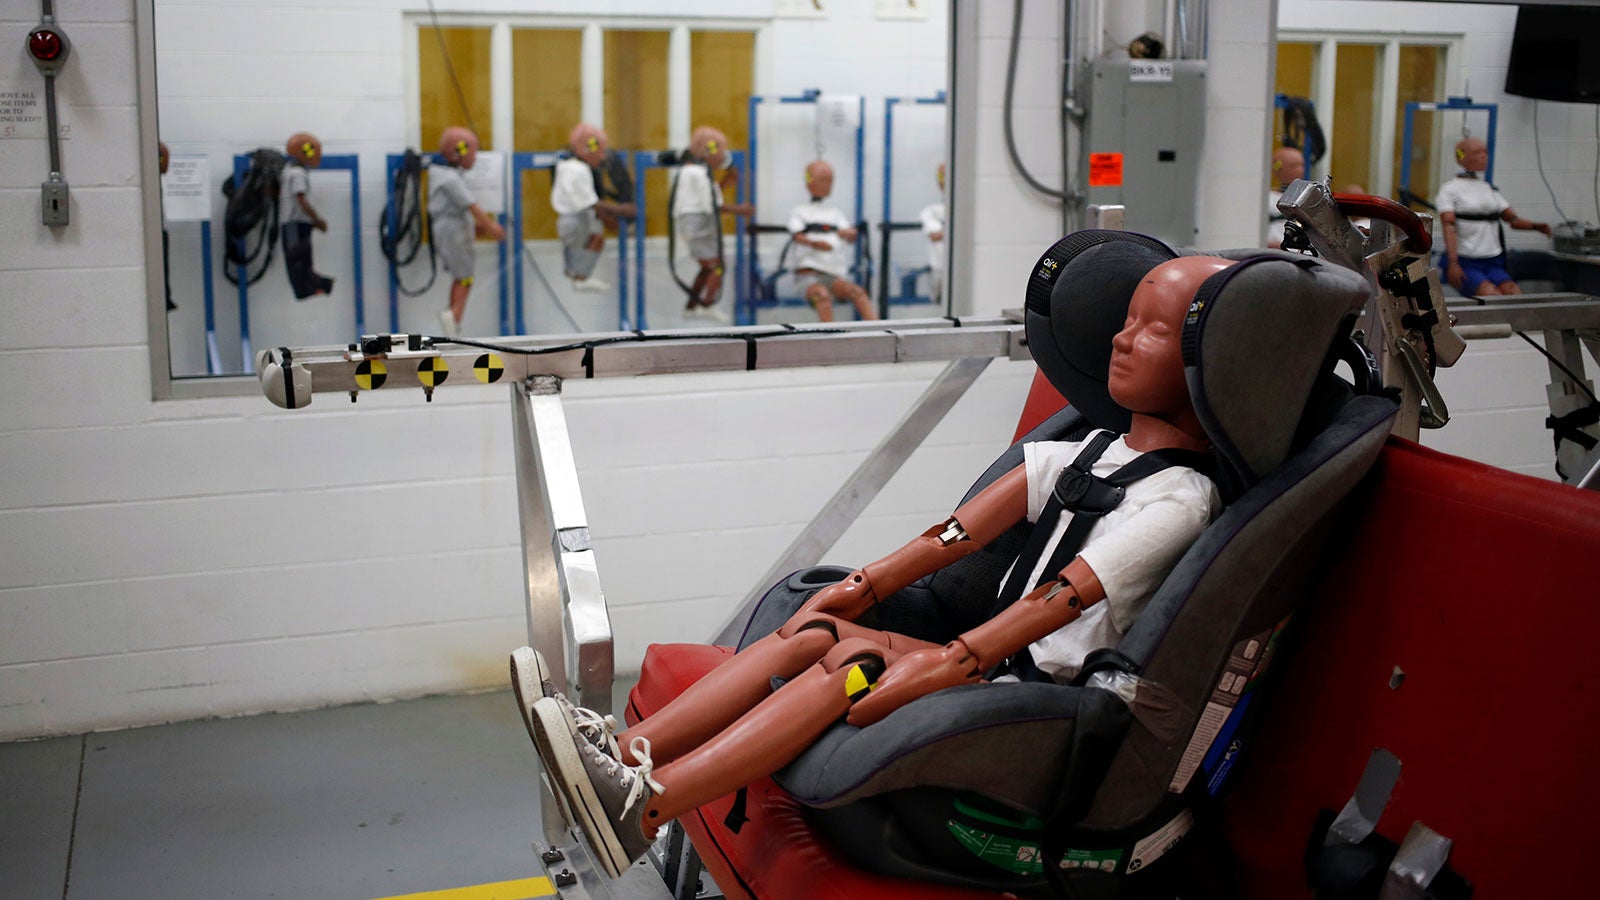 U.S. Crash Test Dummies Don’t Reflect the Population, Report Claims